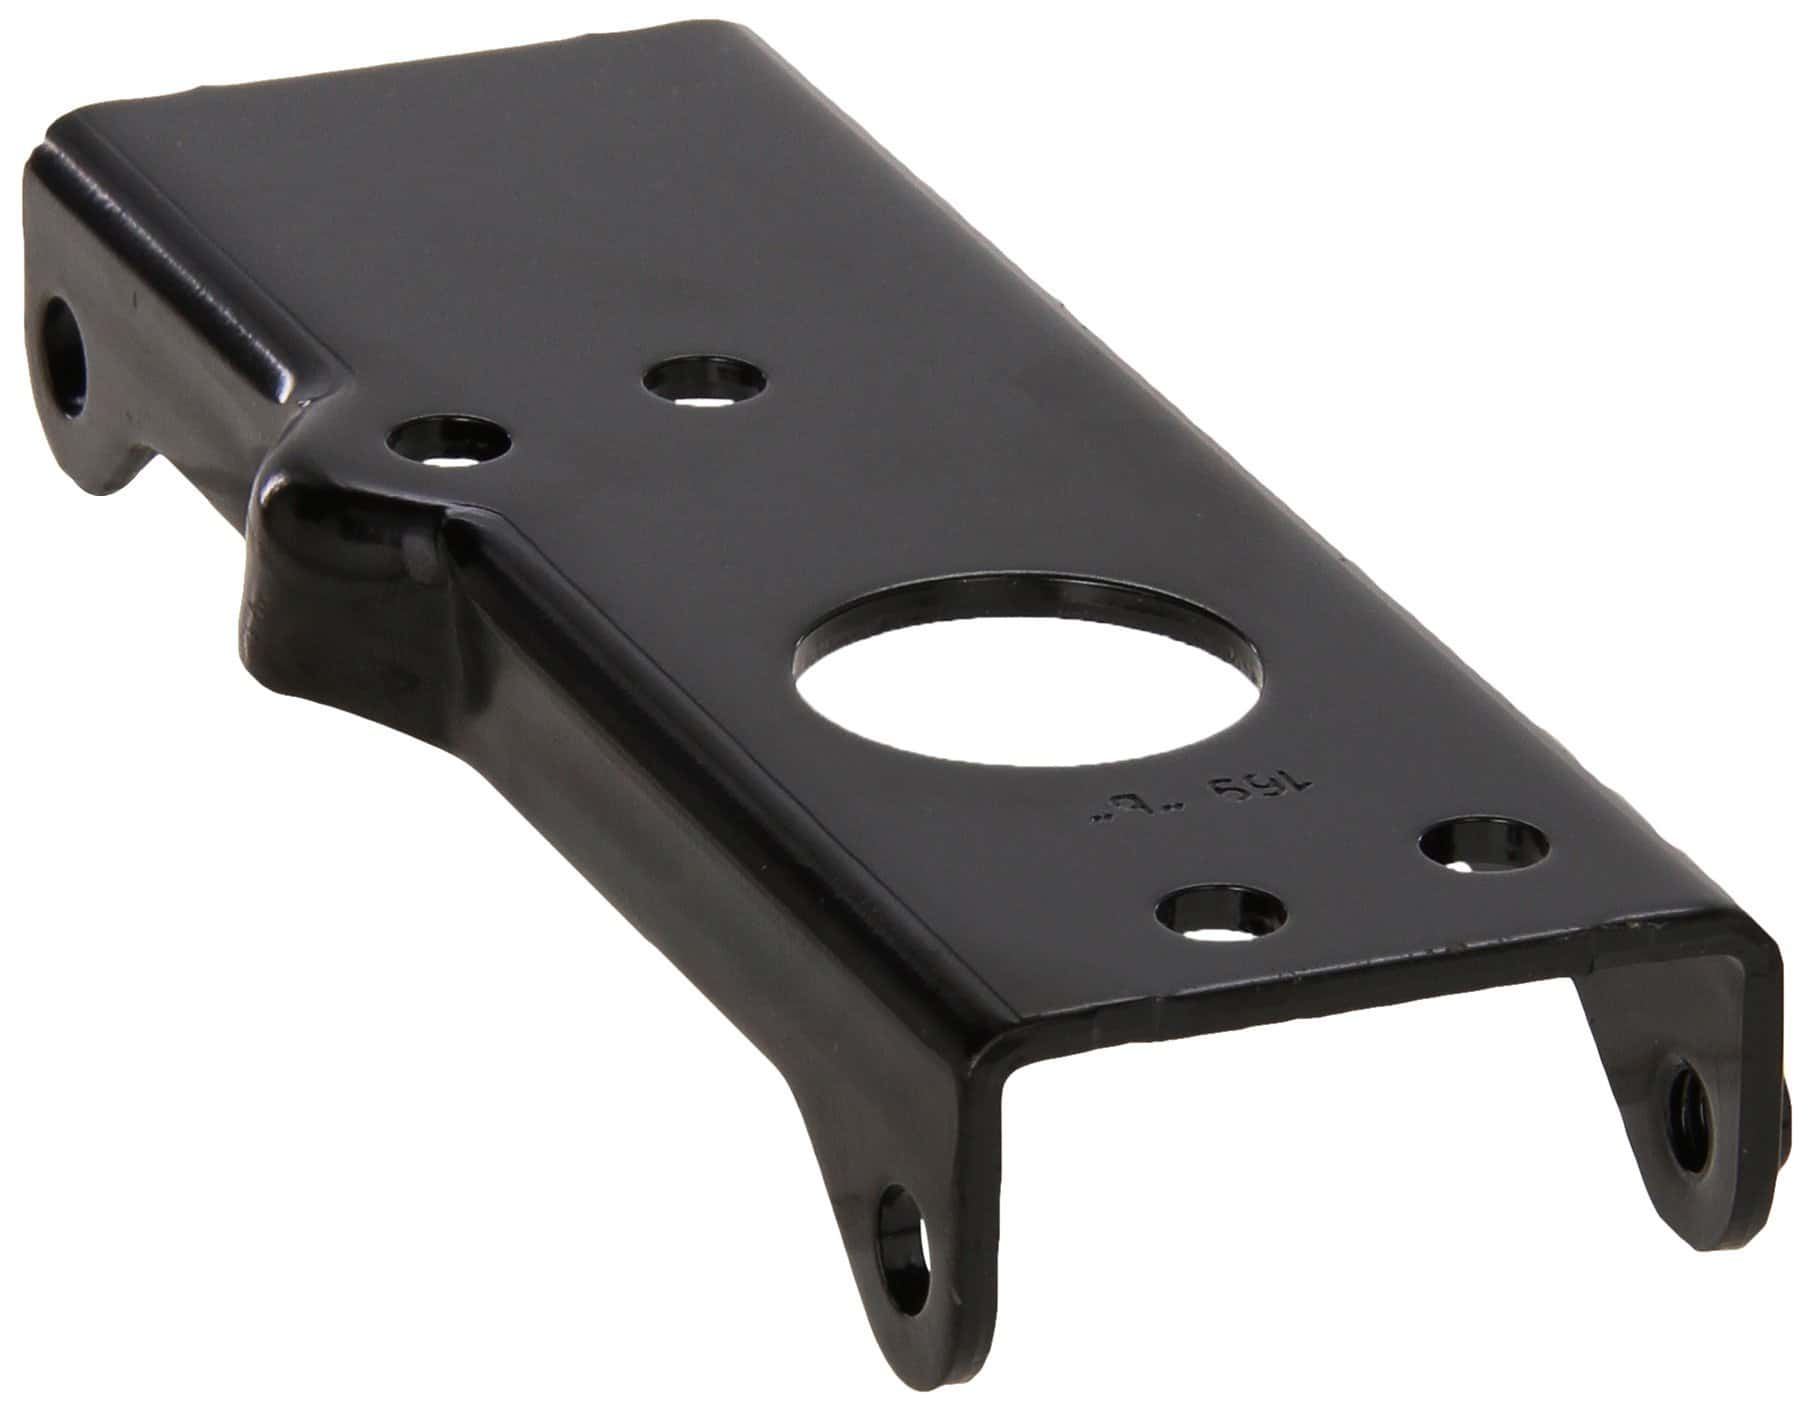 2000 to 2013 Dodge Ram 2500 and 3500 Series truck upgraded Power Steering Pump Mounting Bracket